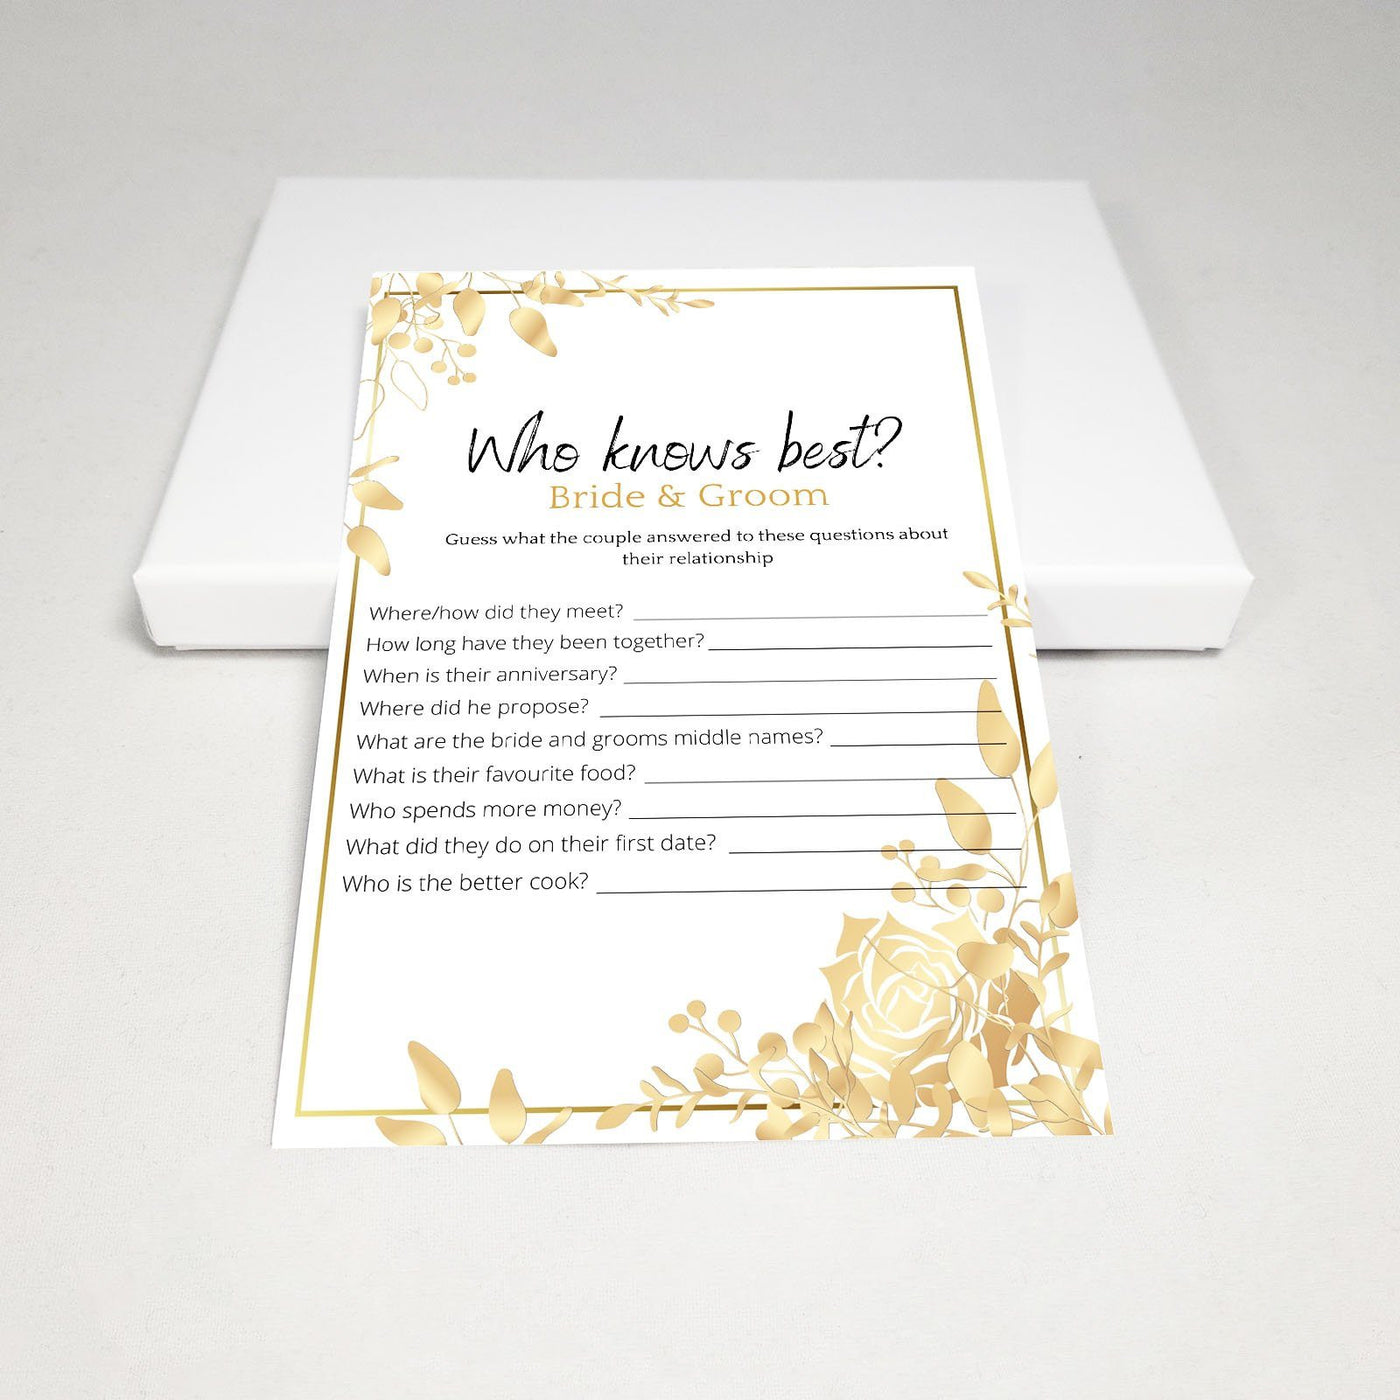 Golden Flowers - Who Knows The Bride Best? | Bridal Shower Game Party Games Your Party Games 